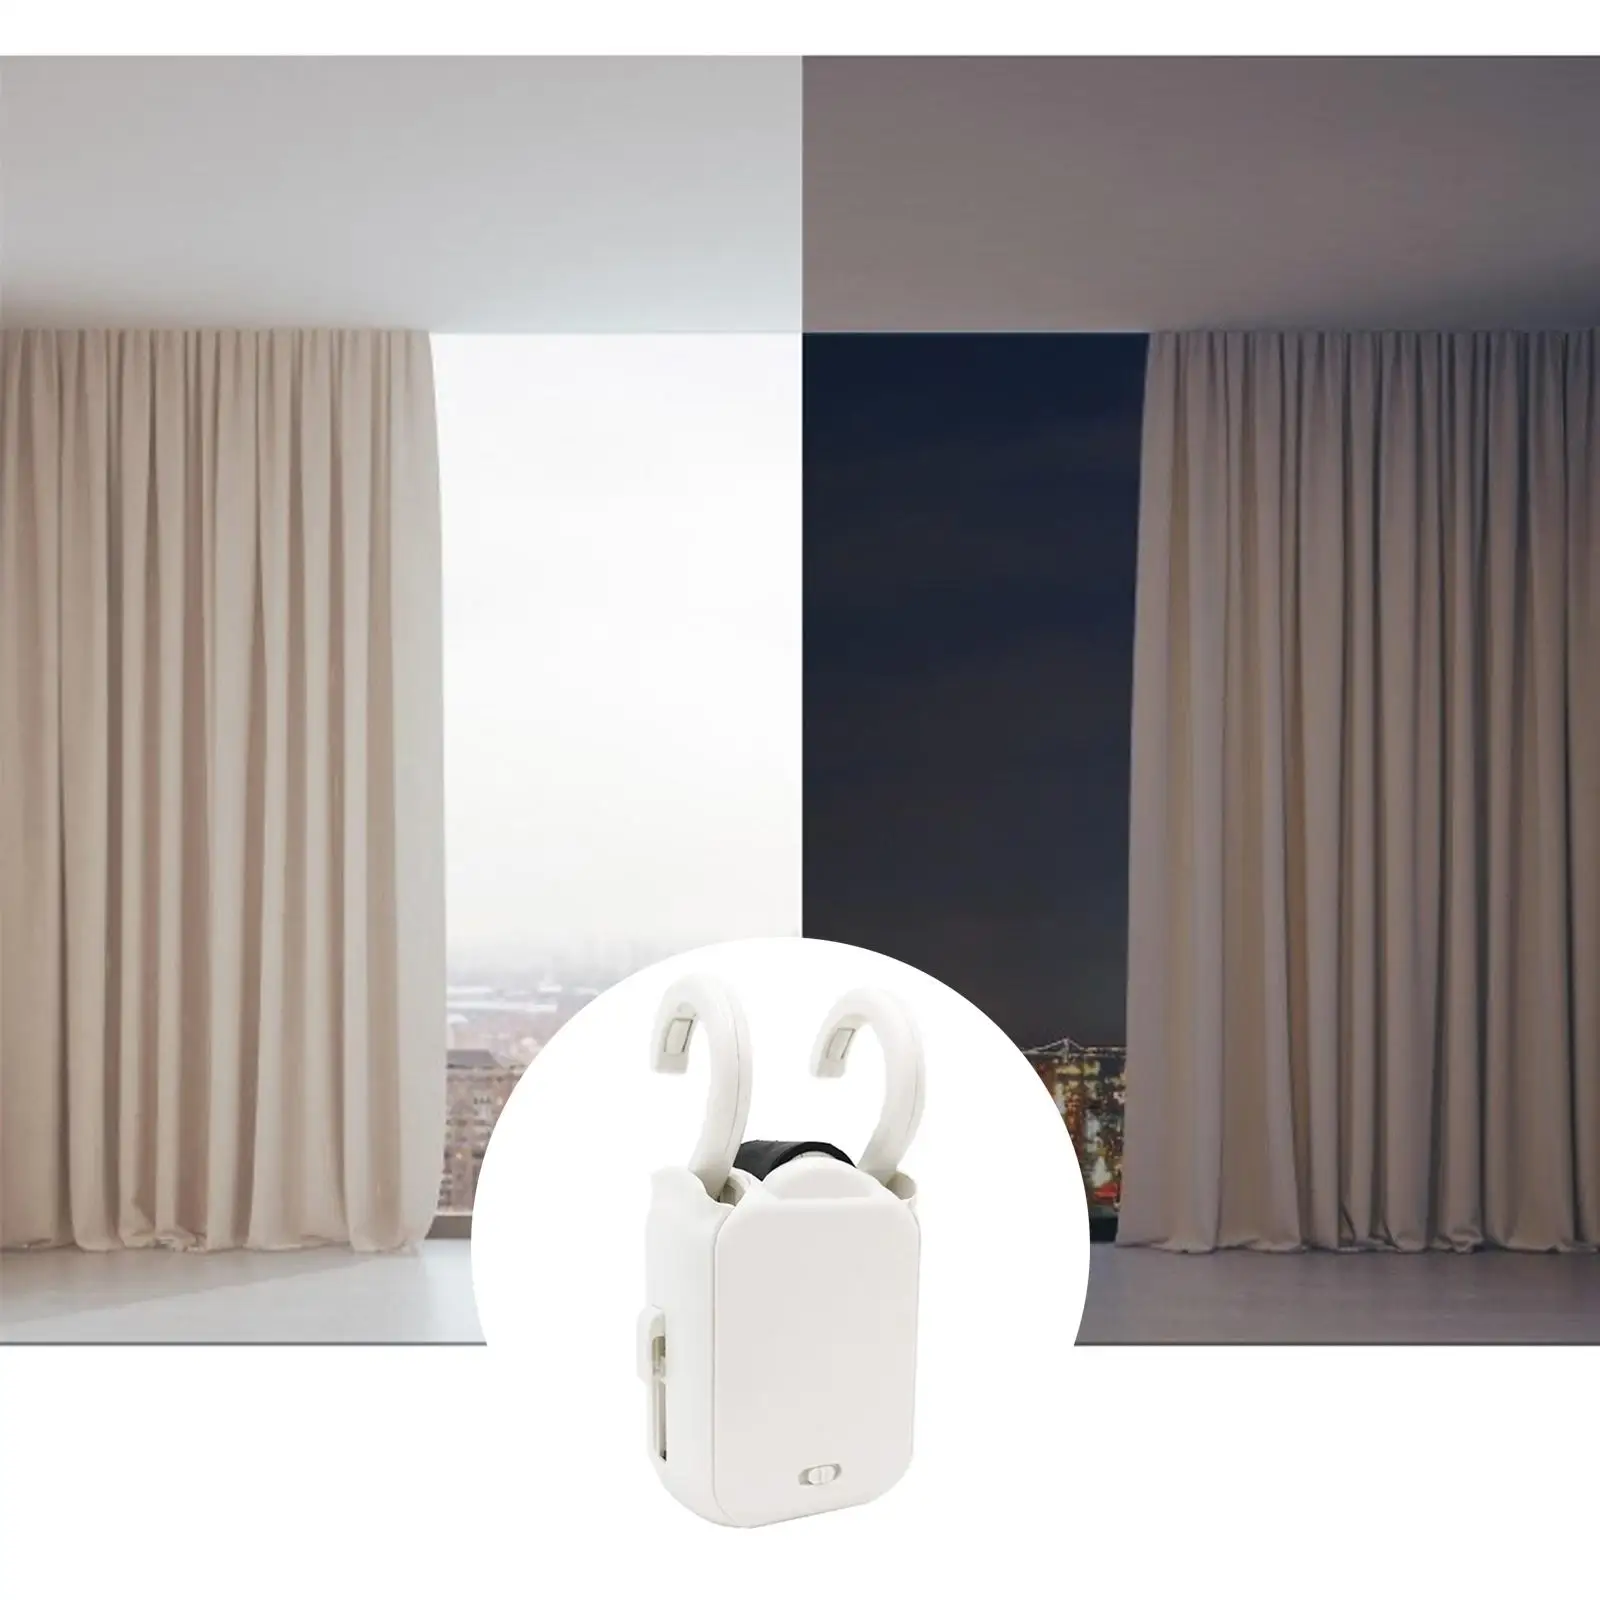 Upgraded Smart Curtain Wireless Remote Voice Control Switch for home